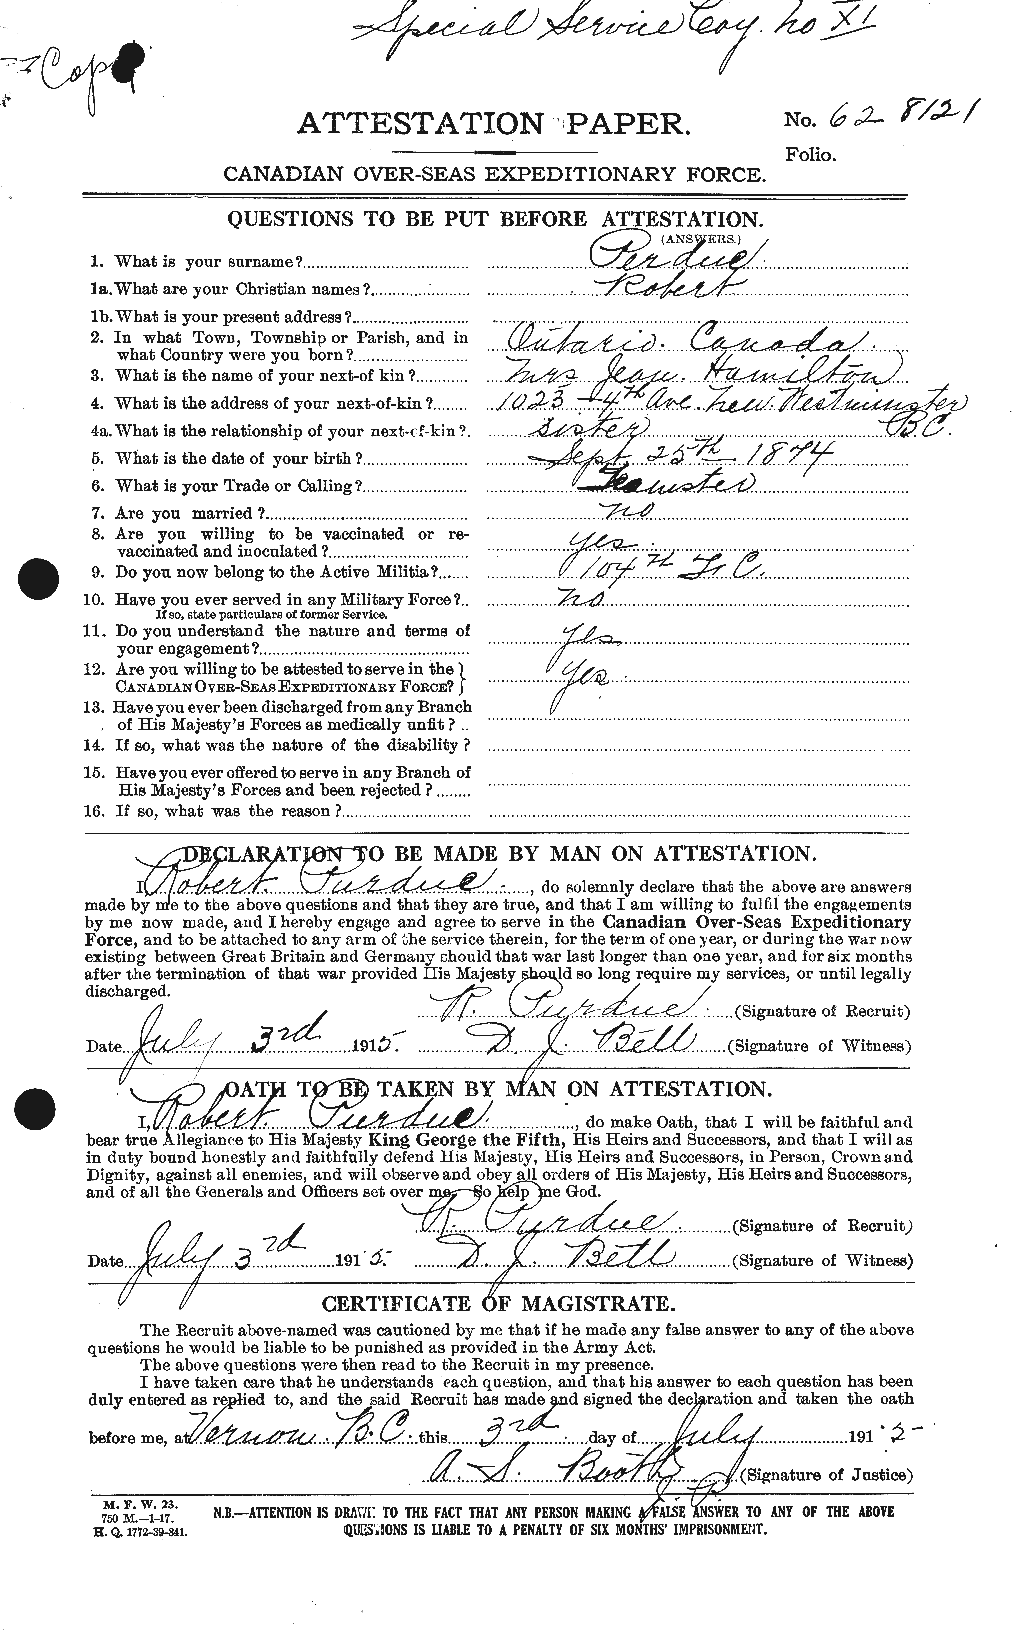 Personnel Records of the First World War - CEF 573838a